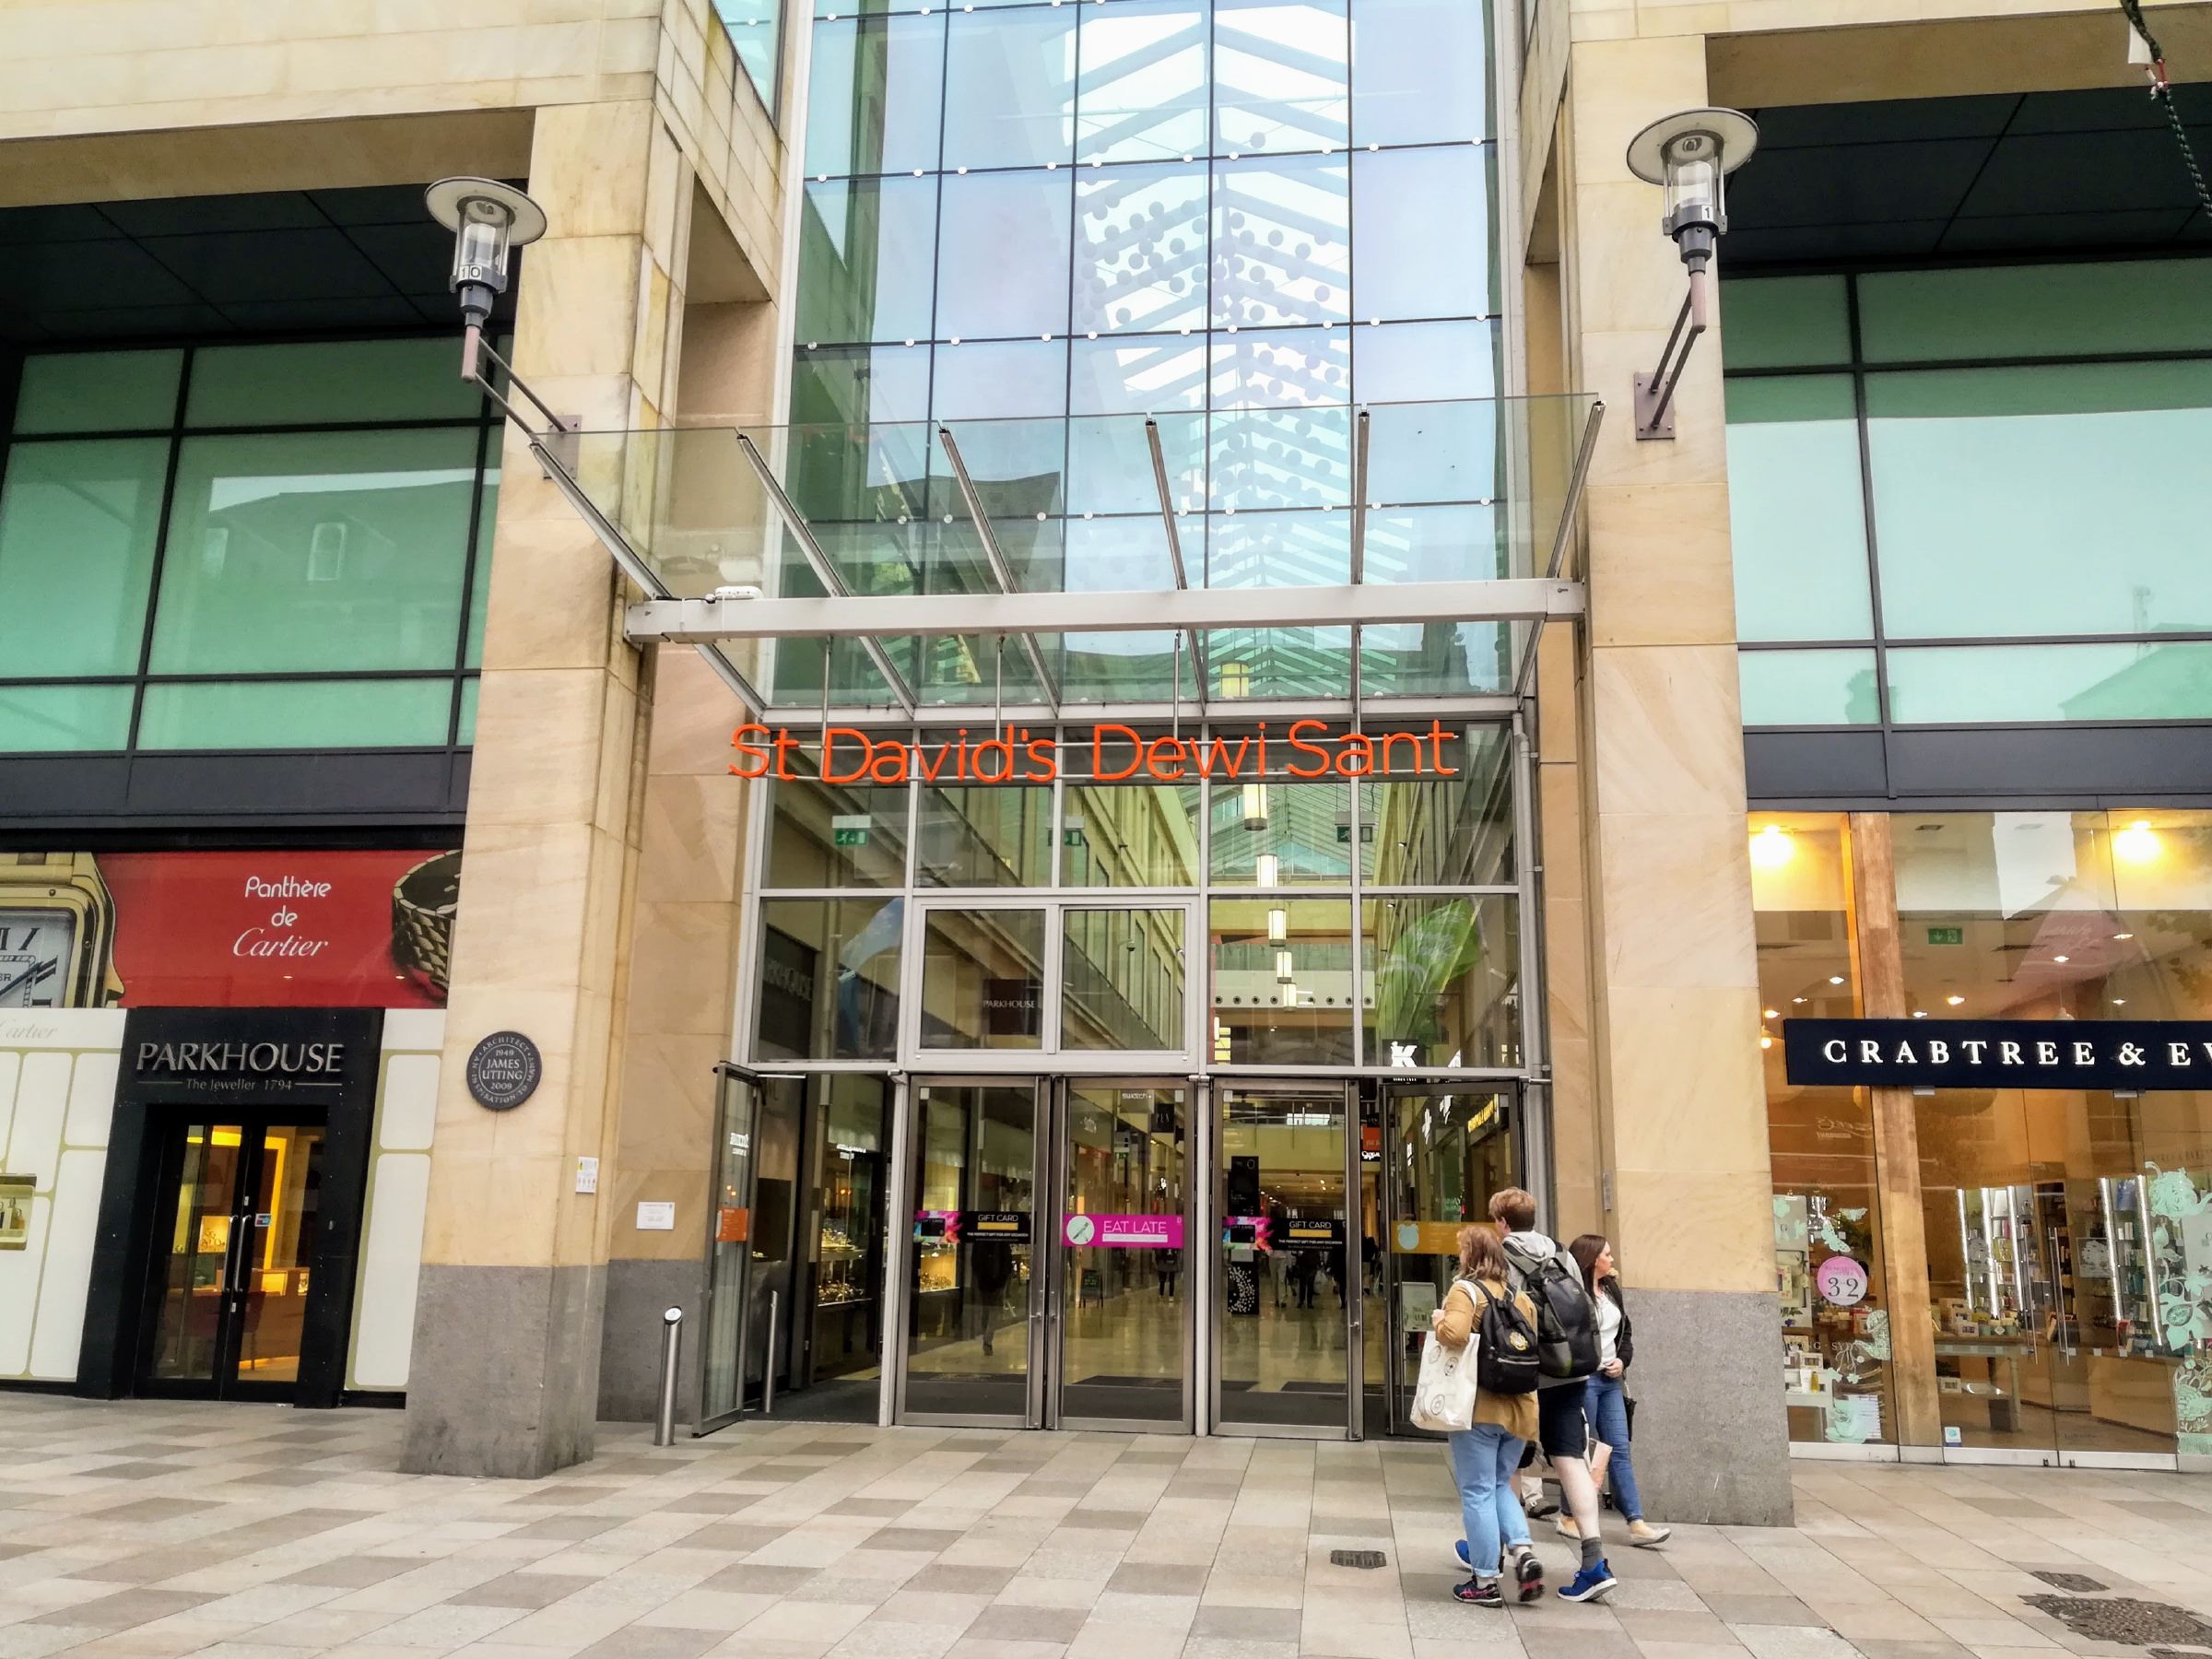 St David's | Cardiff, Wales Shopping - Lonely Planet